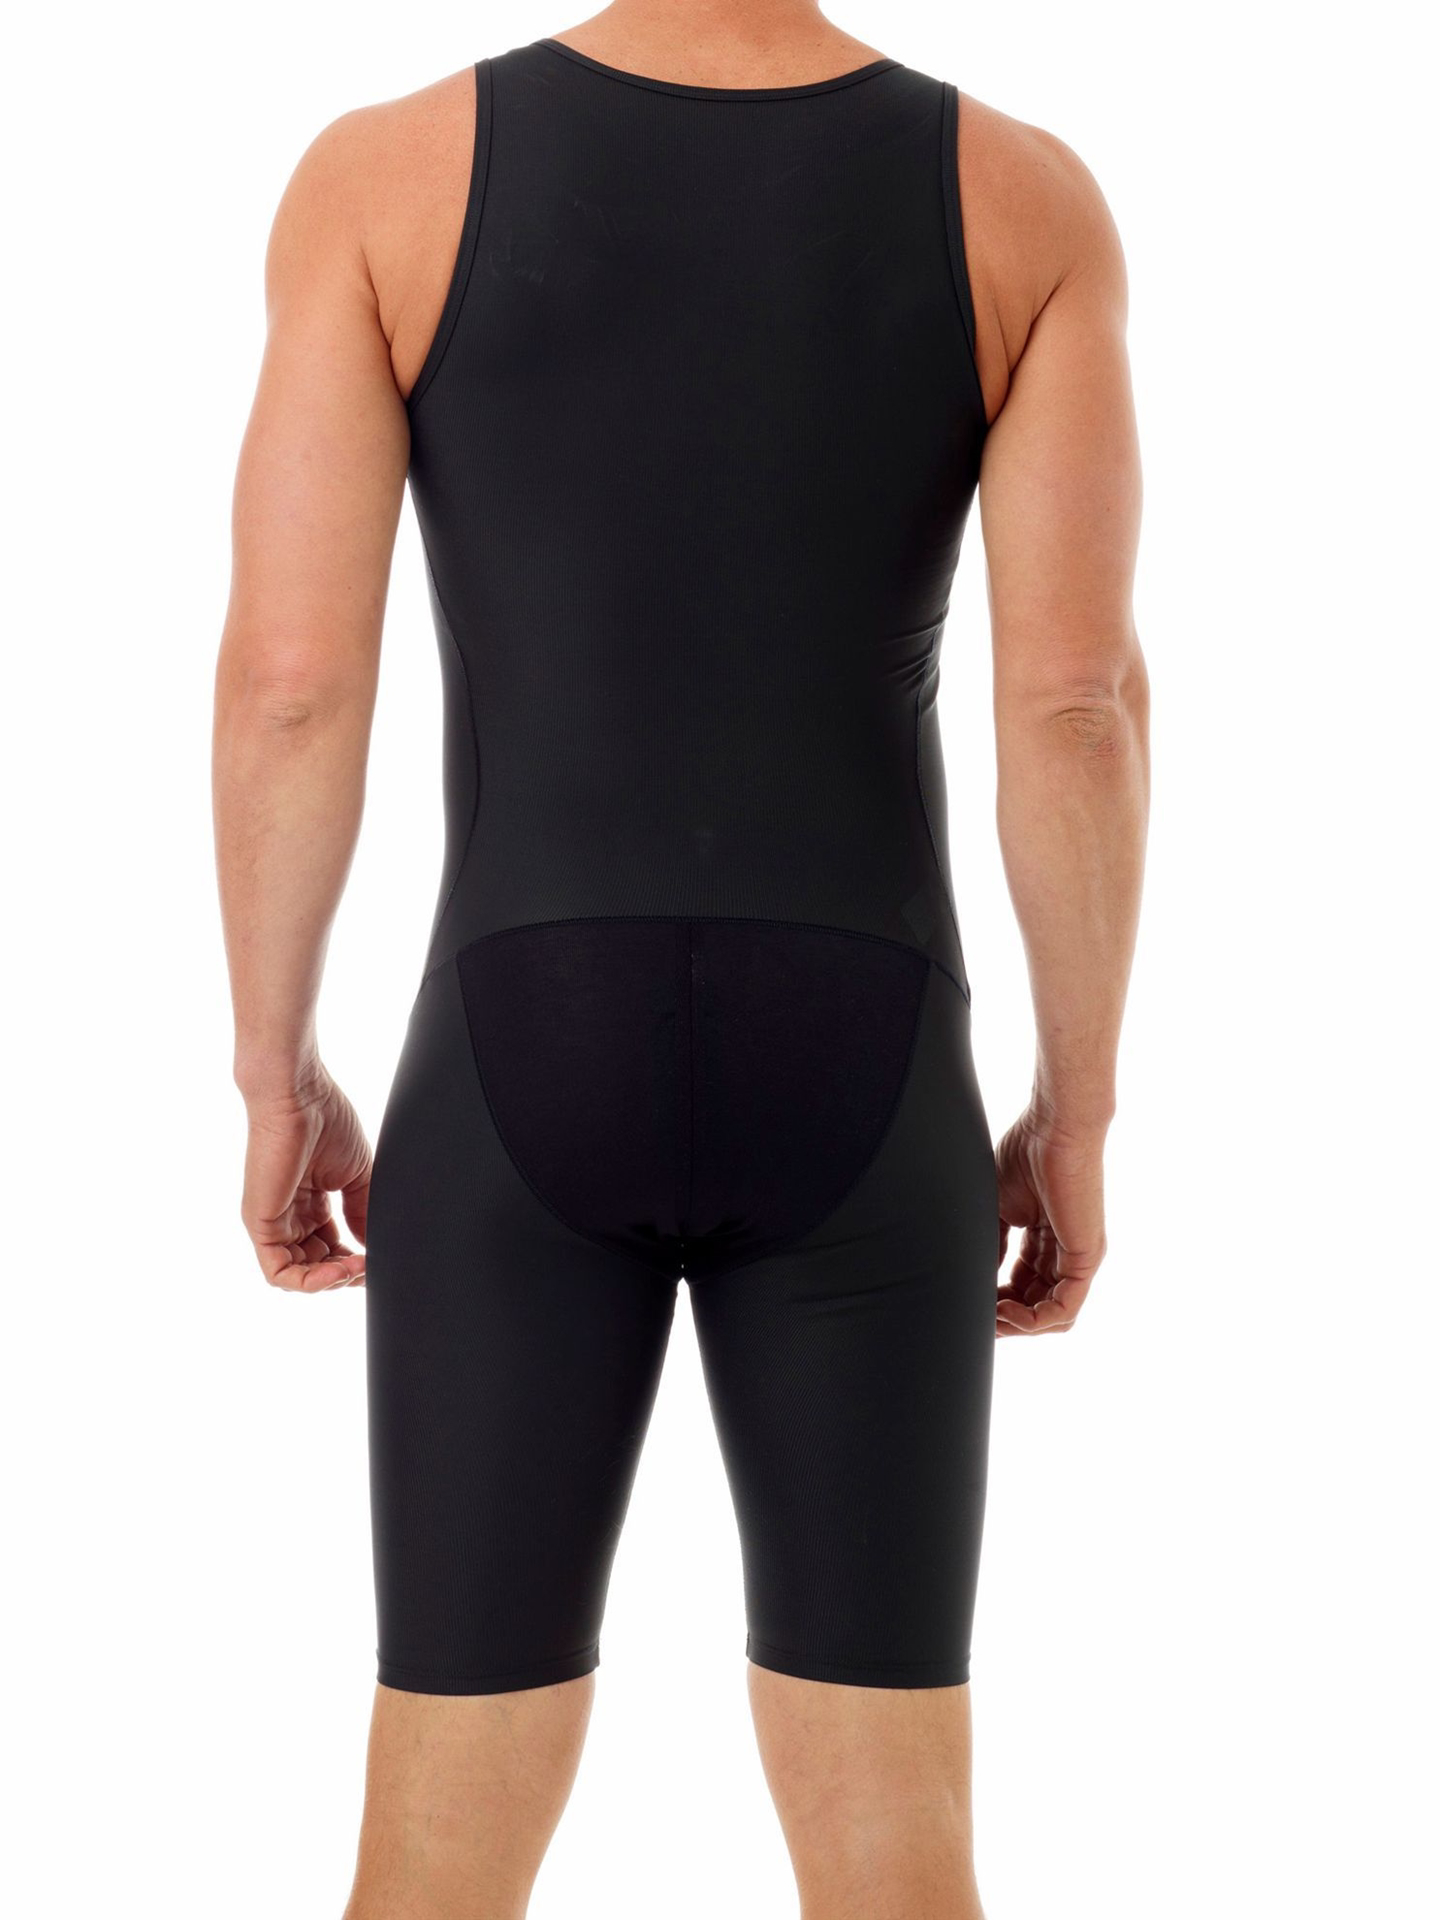 Mens Compression Body Shaper With Tummy Control And Slimming Bodysuit Long  Leg Boxer Underwear Men From Buyocean04, $9.38